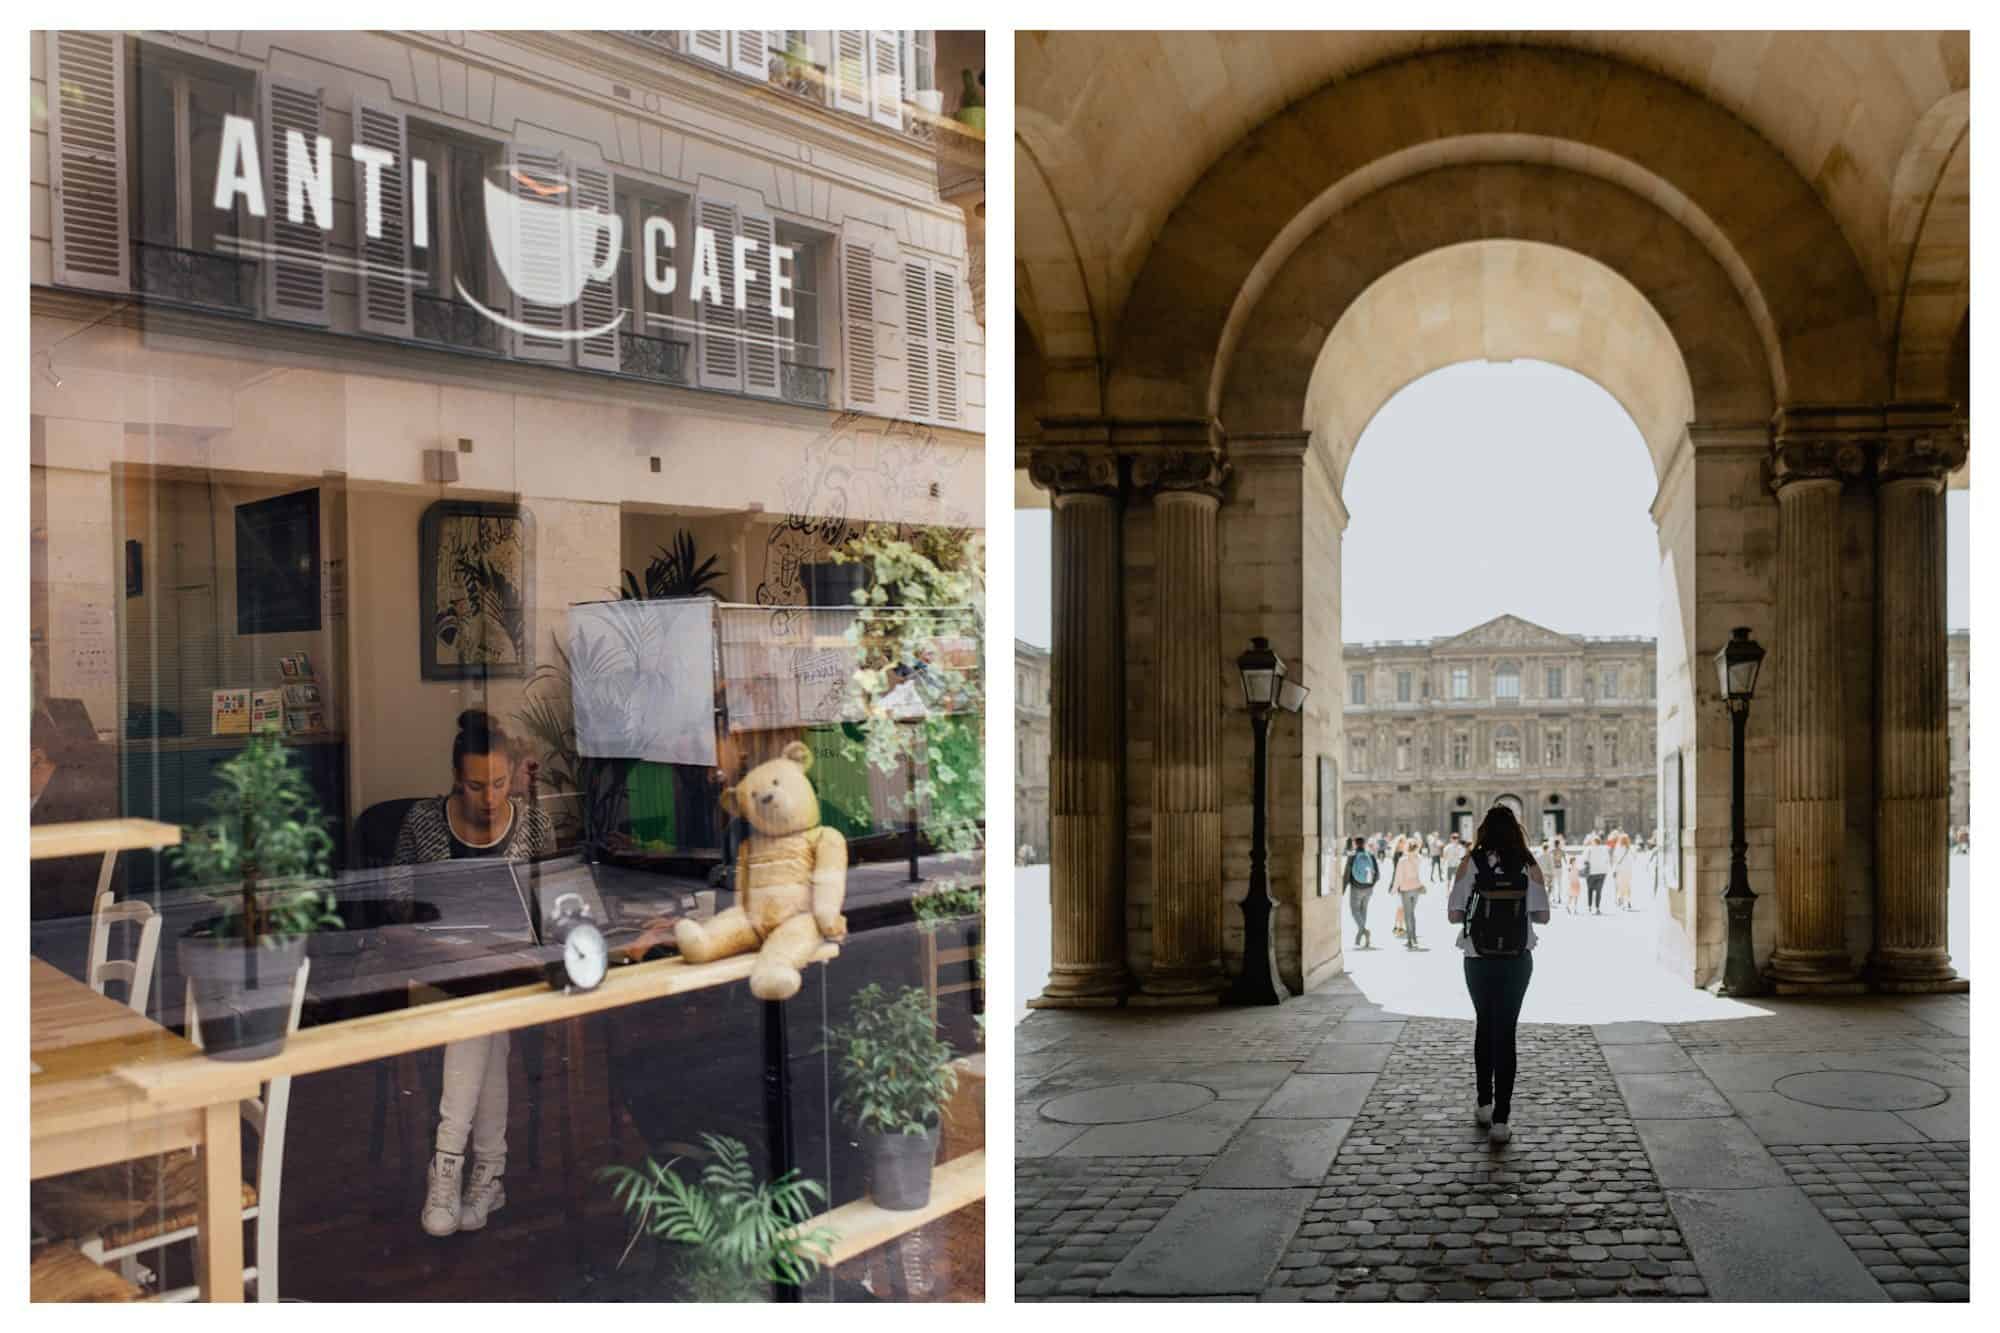 Co-working coffee shops in Paris are all the rage, including the Anti-café seen here (left). Exploring the Louvre Museum in Paris and passing under the arched passageway from rue de Rivoli (right).